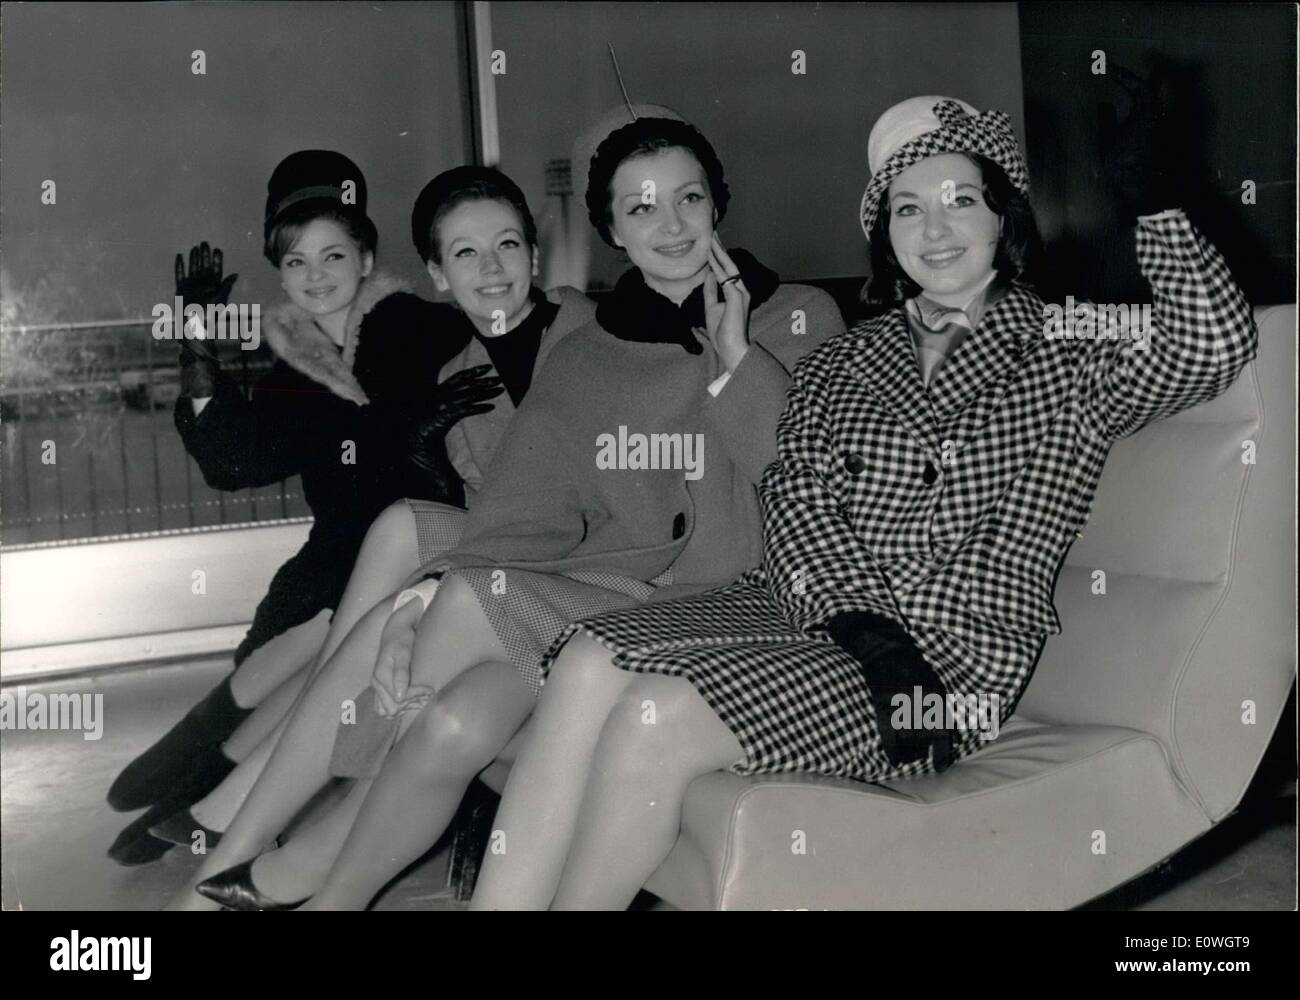 Dec. 12, 1962 - Left to right: Miss Uruguay, Marie-Noelle Genoveso; Miss England, Sue Burgess; Miss Sweden, Margareth Melin; and Miss France, Monique Lemaire. Stock Photo